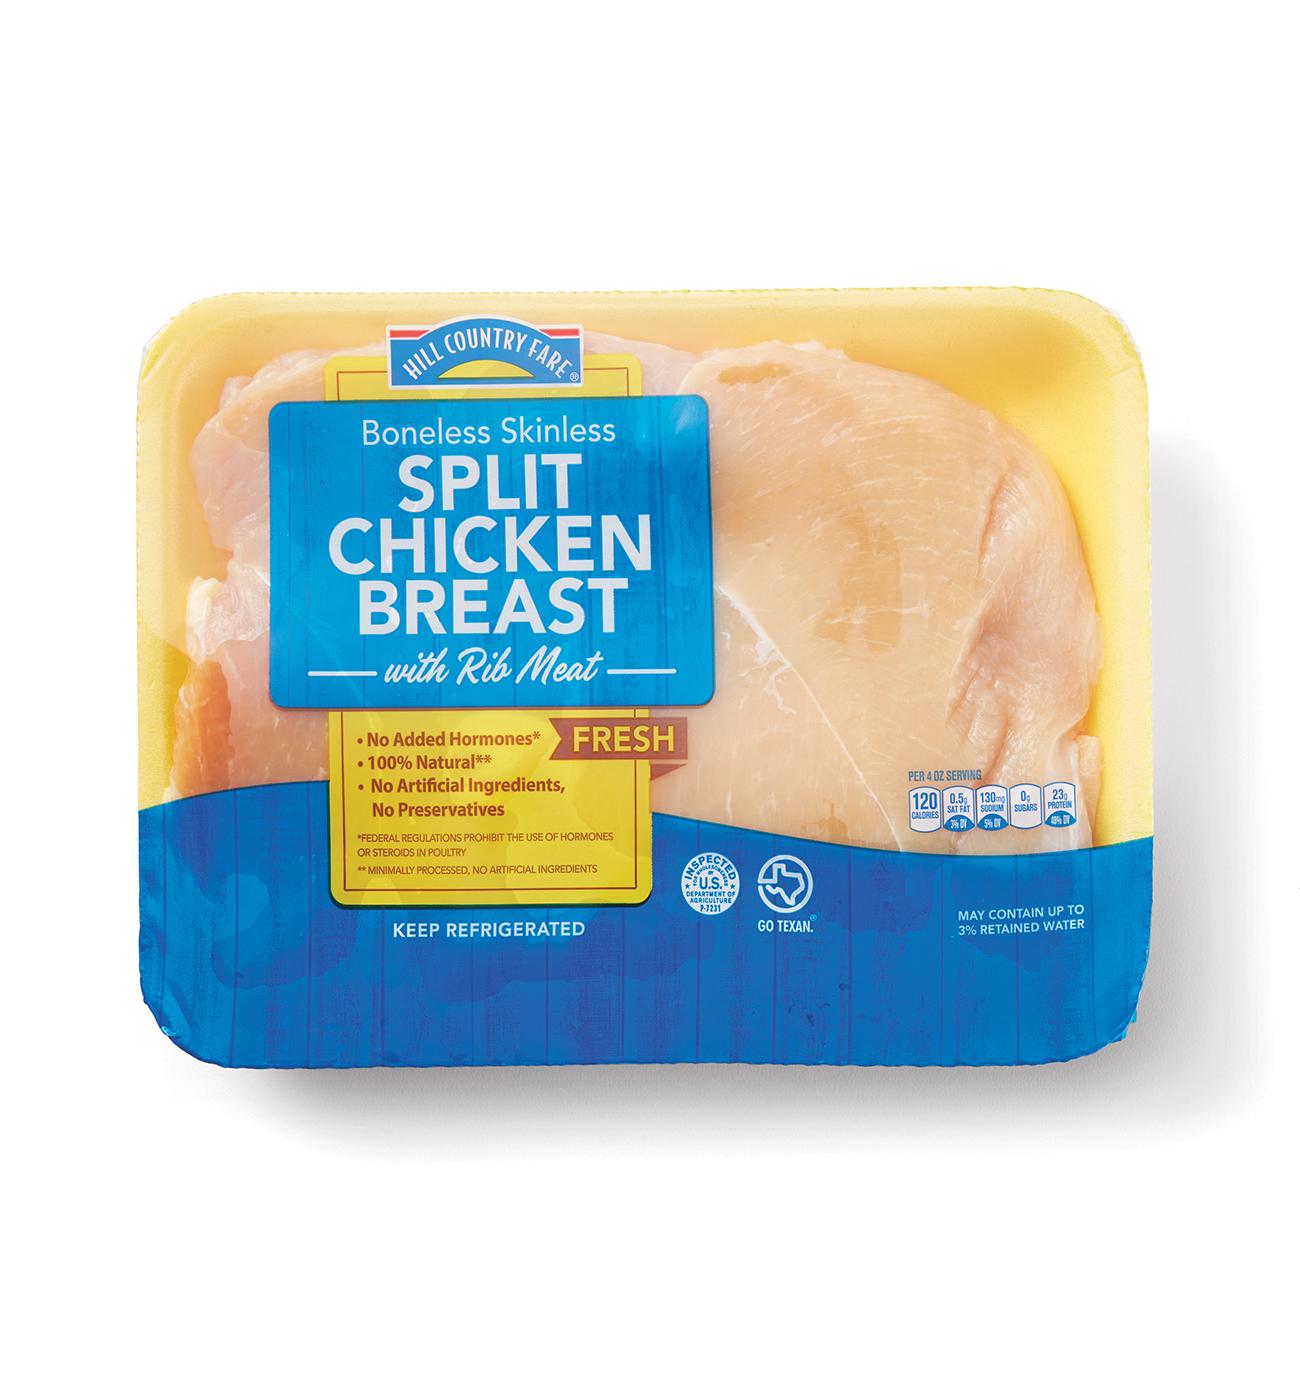 Hill Country Fare Boneless Skinless Split Chicken Breast; image 1 of 4